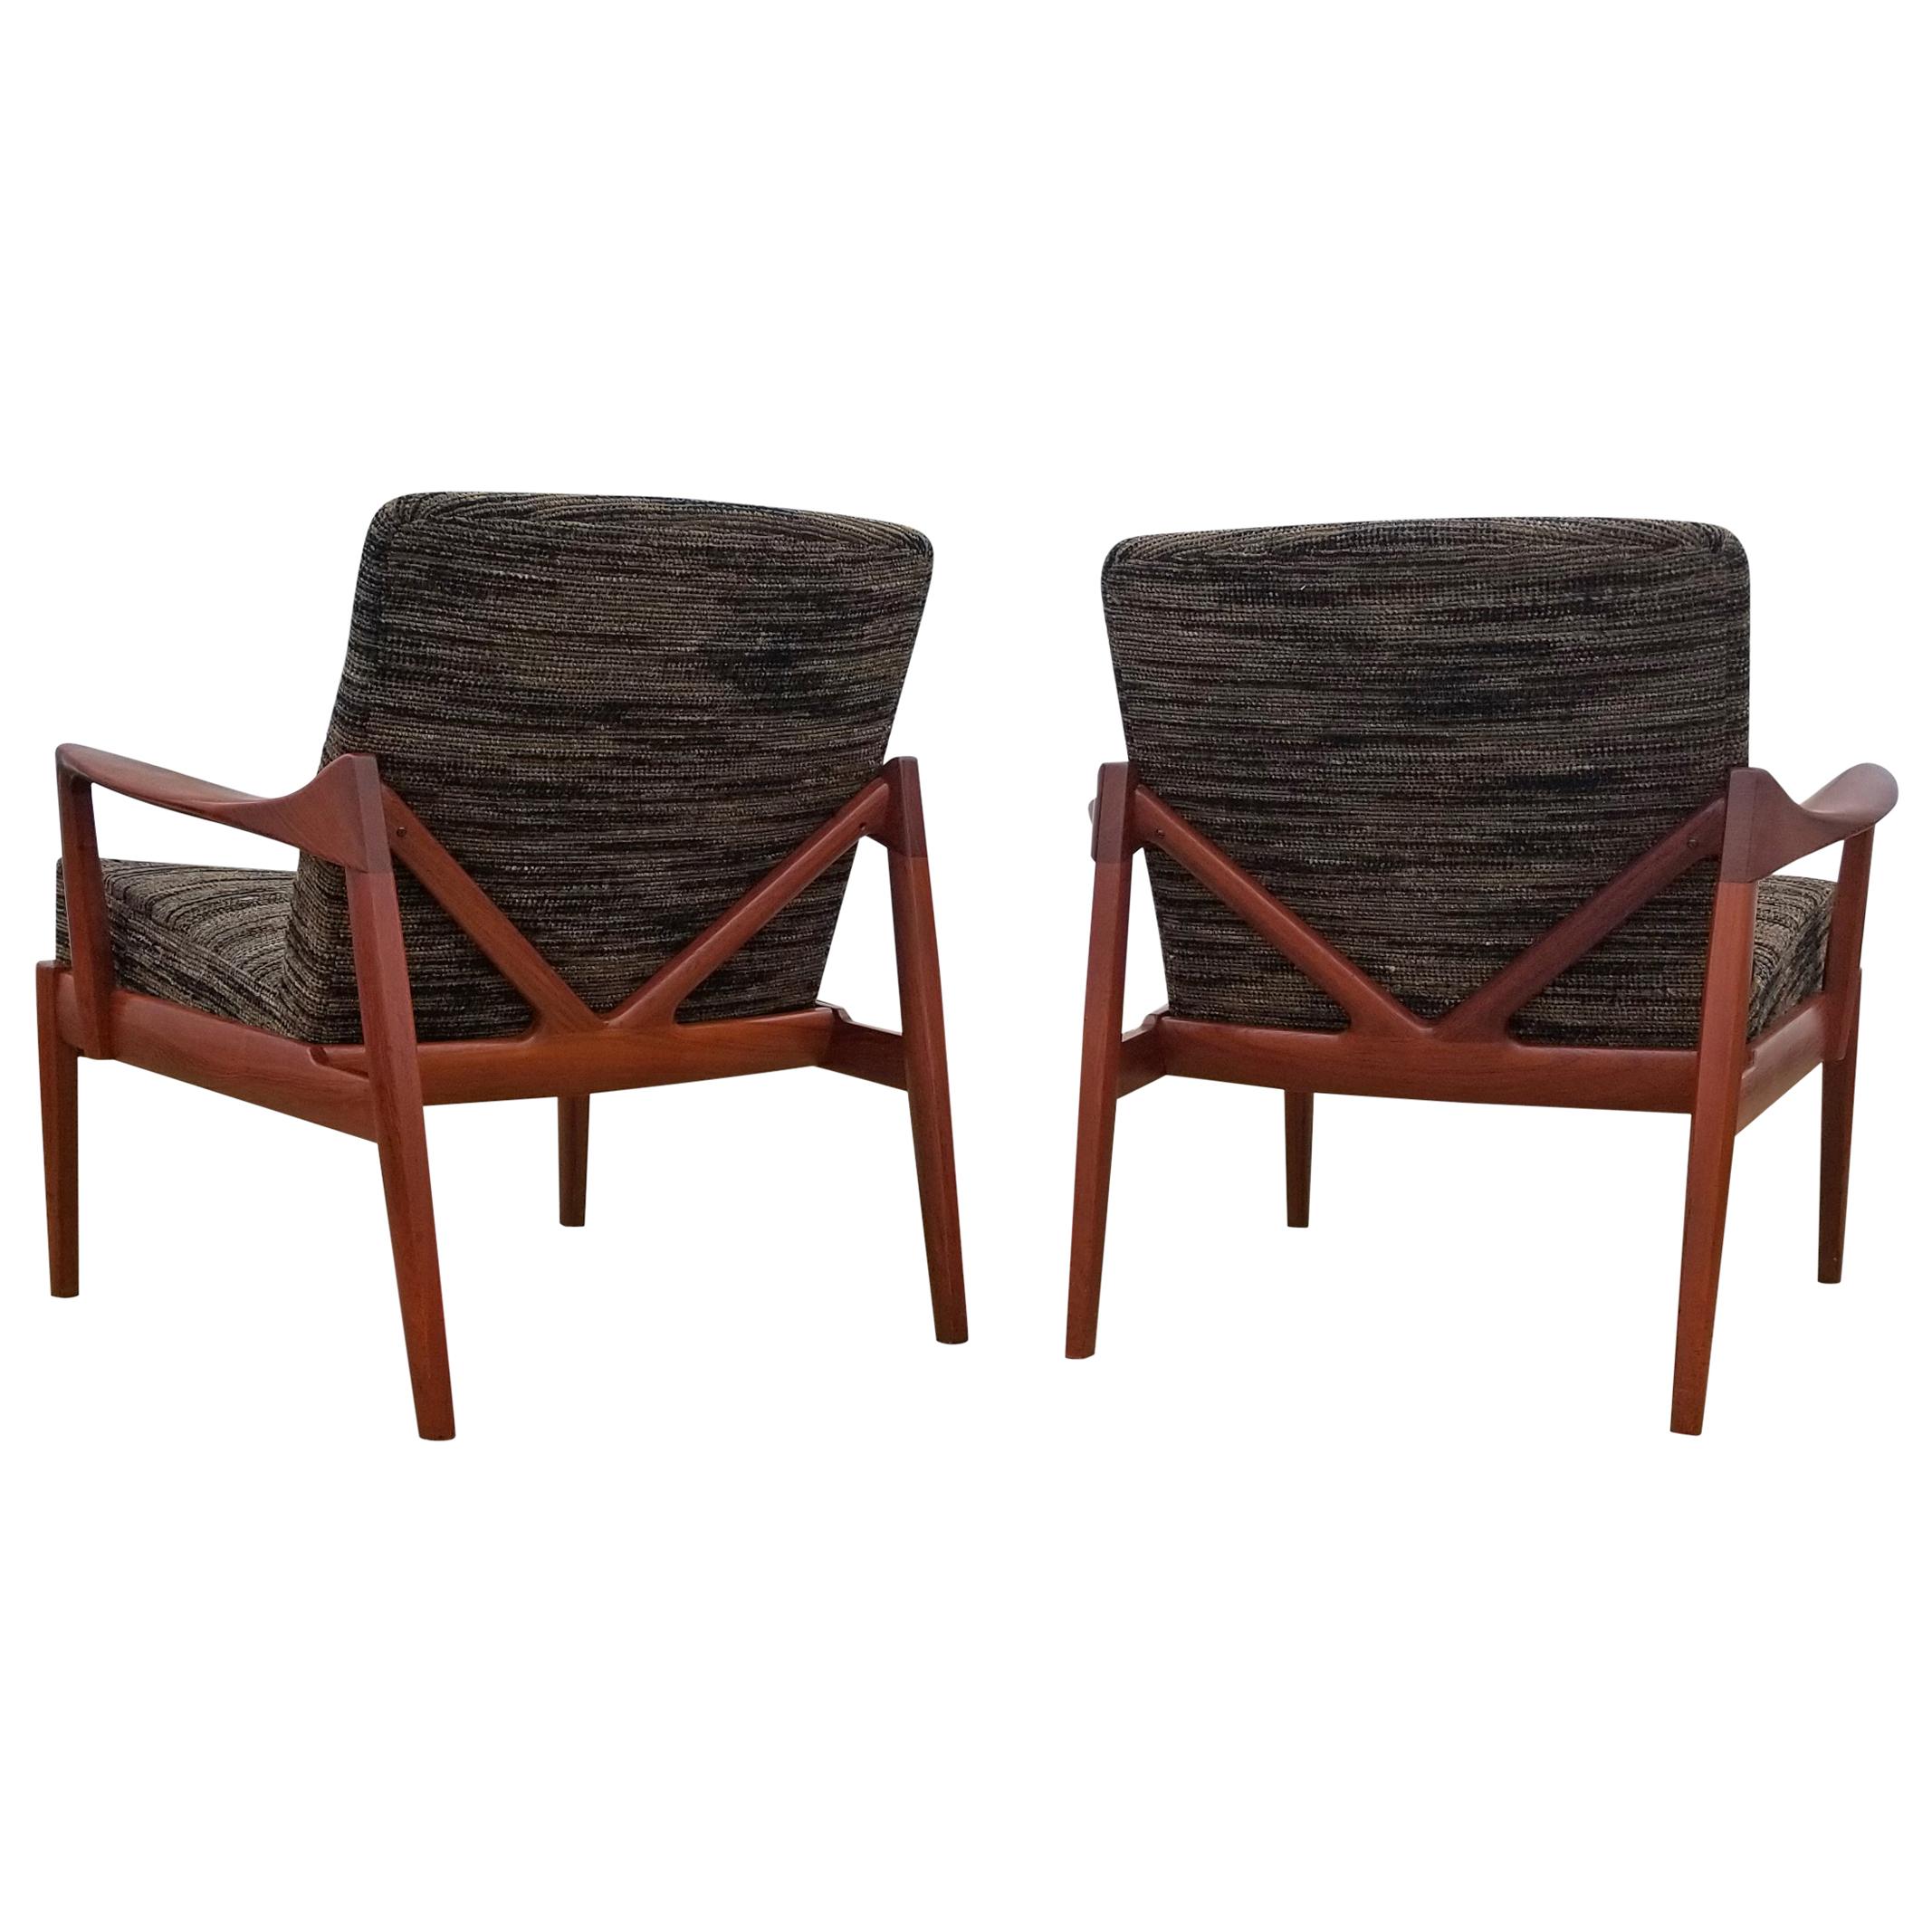 Pair of Tove and Edvard Kindt-Larsen Lounge Chairs